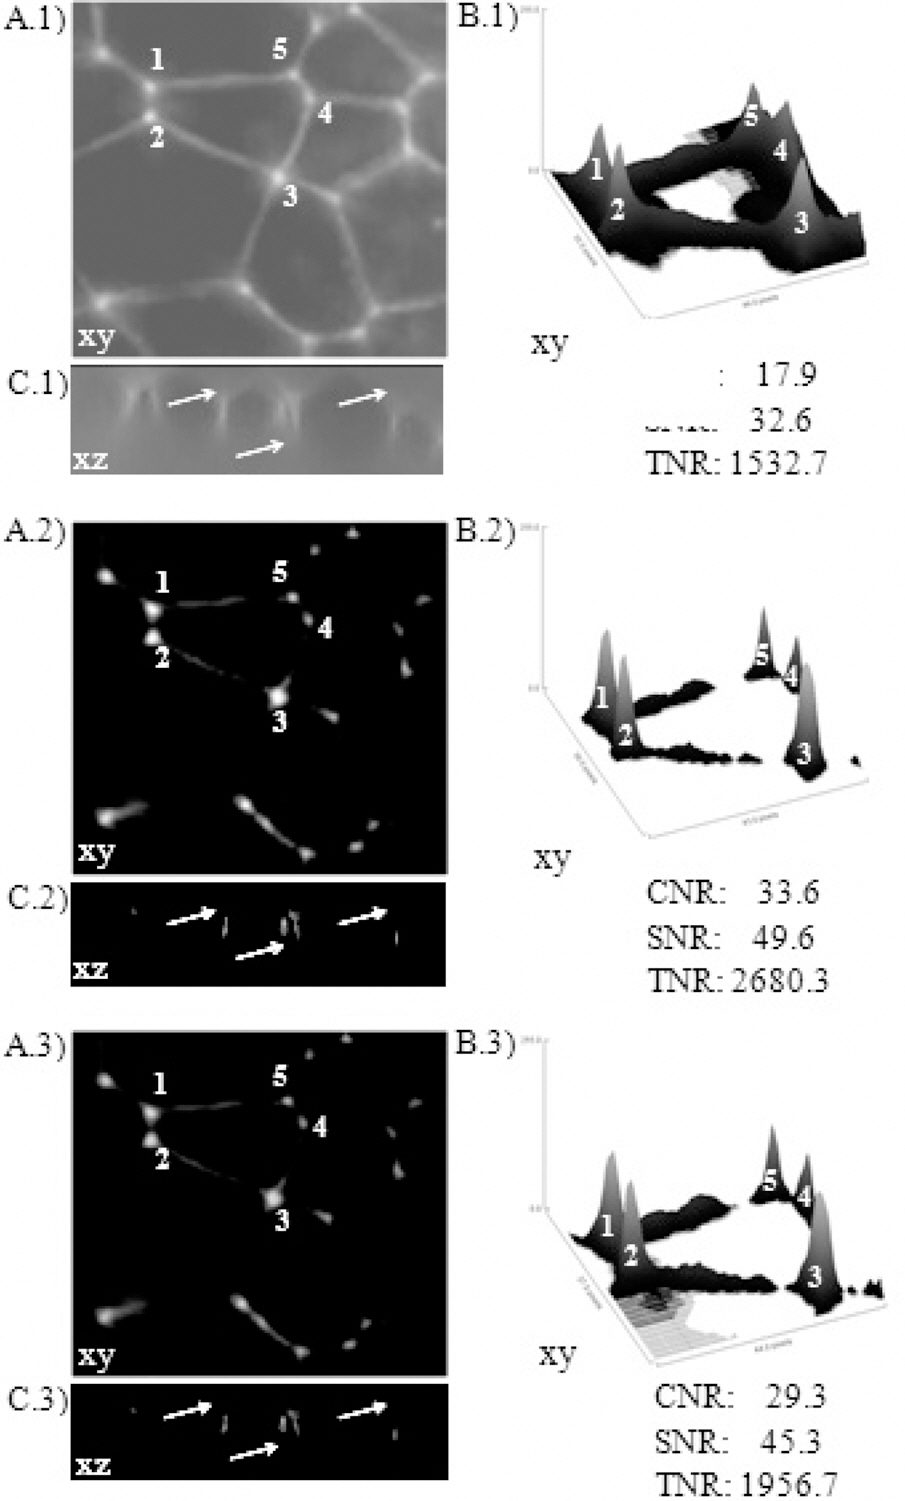 Deconvolution of a Rhinella arenarum embryo imagesobtained with the 40X objective (128 images at 0.25 μm/step)where each bright dot represents cell-cell contacts. Row 1represents raw images row 2 is row 1 after deconvolution usingan ideal PSF and row 3 is row 1 after deconvolution with anon-ideal PSF (cover slip N° 0). Set A shows 3D maximumintensityprojections set B the surface plot of five pointsindicated in set A and set C one axial cross-section (x-z plane).Numbers (1-5) and arrows are added to mark specific parts ofthe images in order to point out deconvolution improvementsin image quality. CNR (Contrast-to-Noise Ratio) SNR (Signalto-Noise Ratio) and TEN (a Tenengrad-based function) wereused to evaluated image quality. Each indicator represents themean of five stacks.